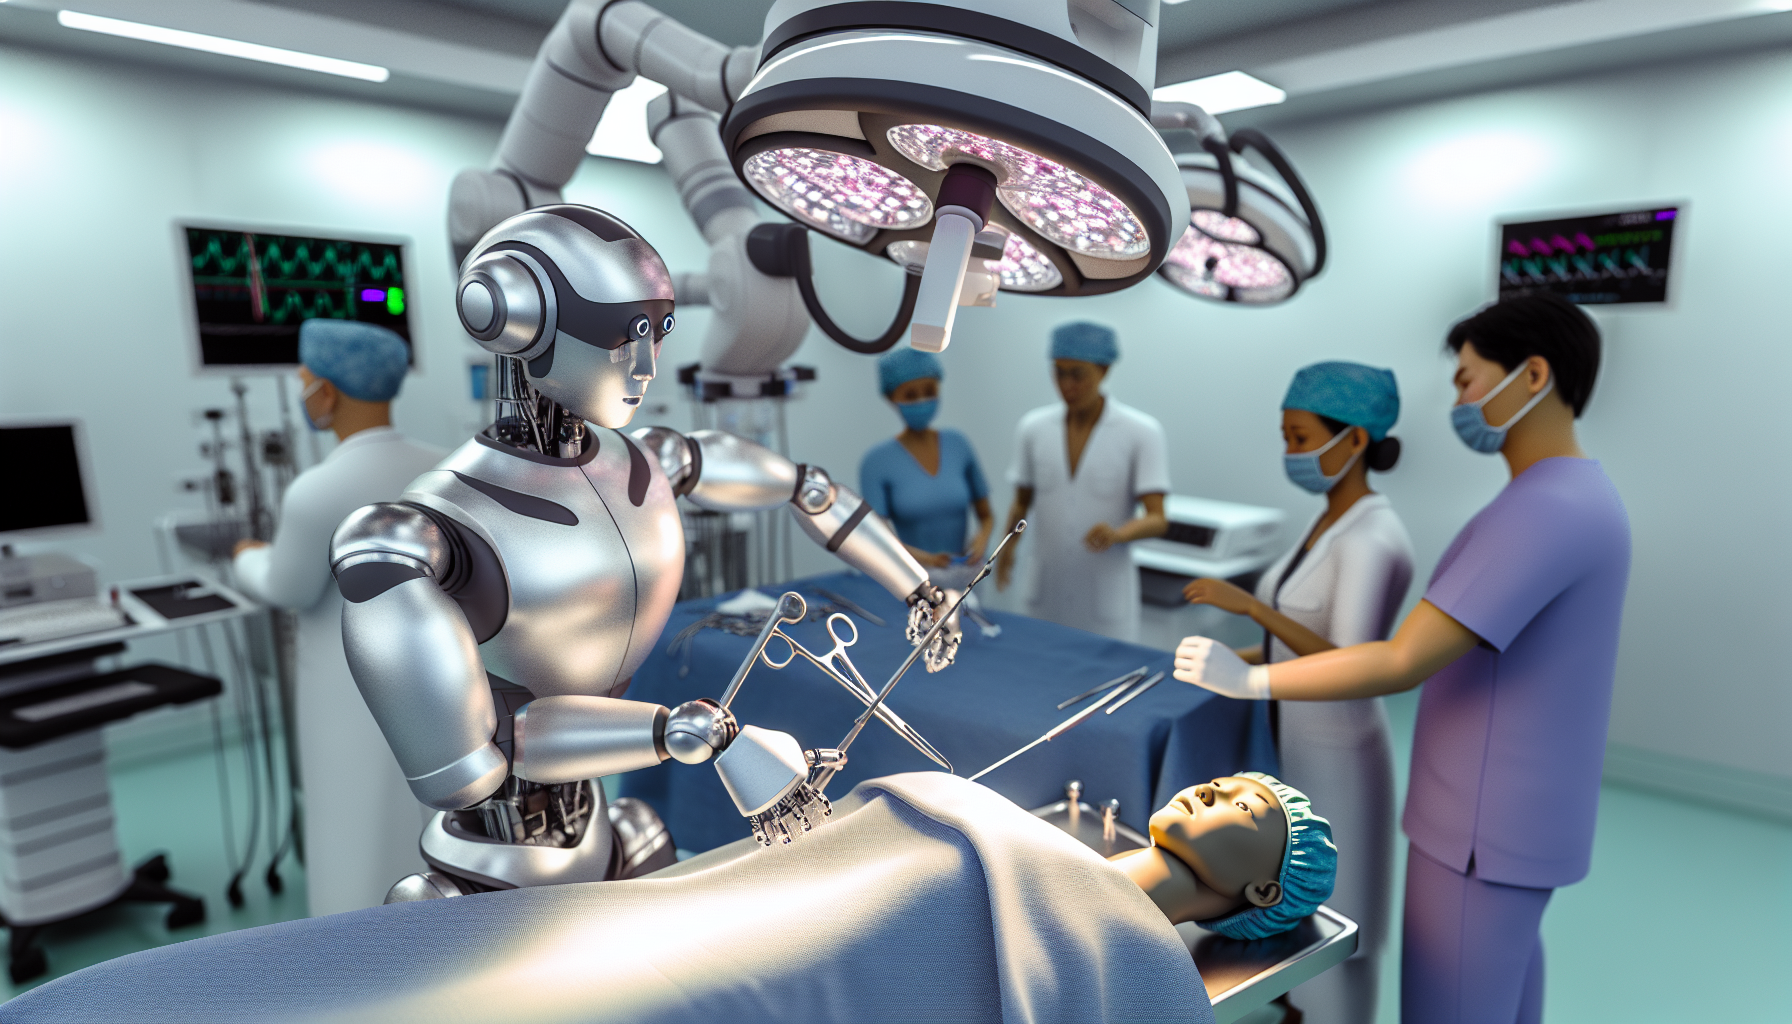 Humanoid robot performing surgery in a medical setting